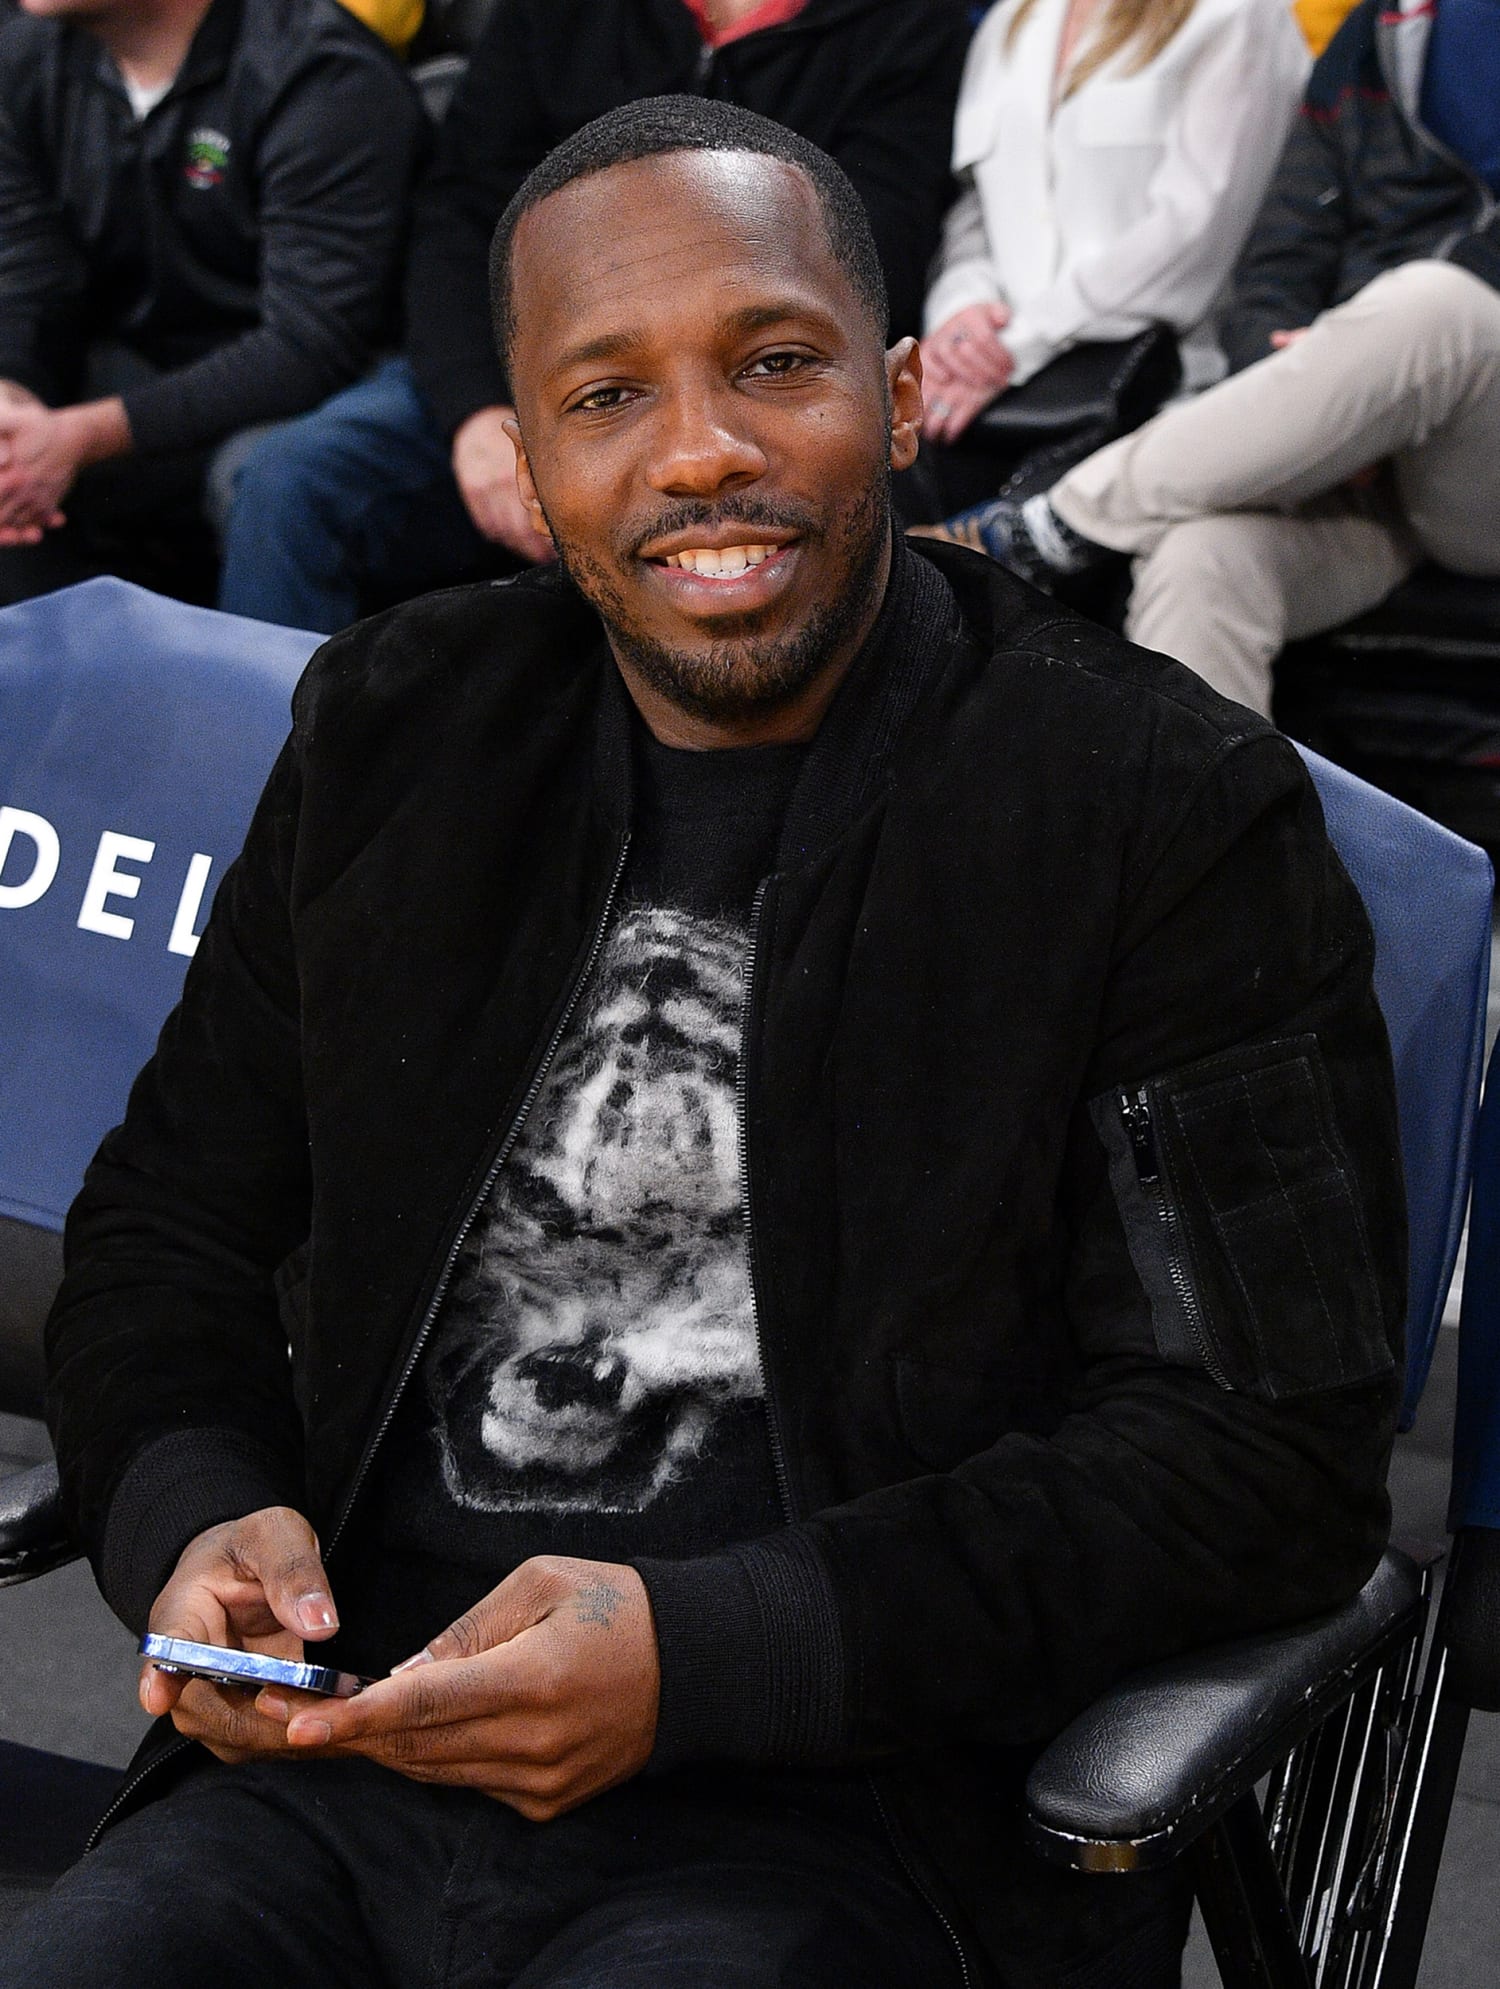 Who Is Adele's Boyfriend? Everything to Know About Rich Paul